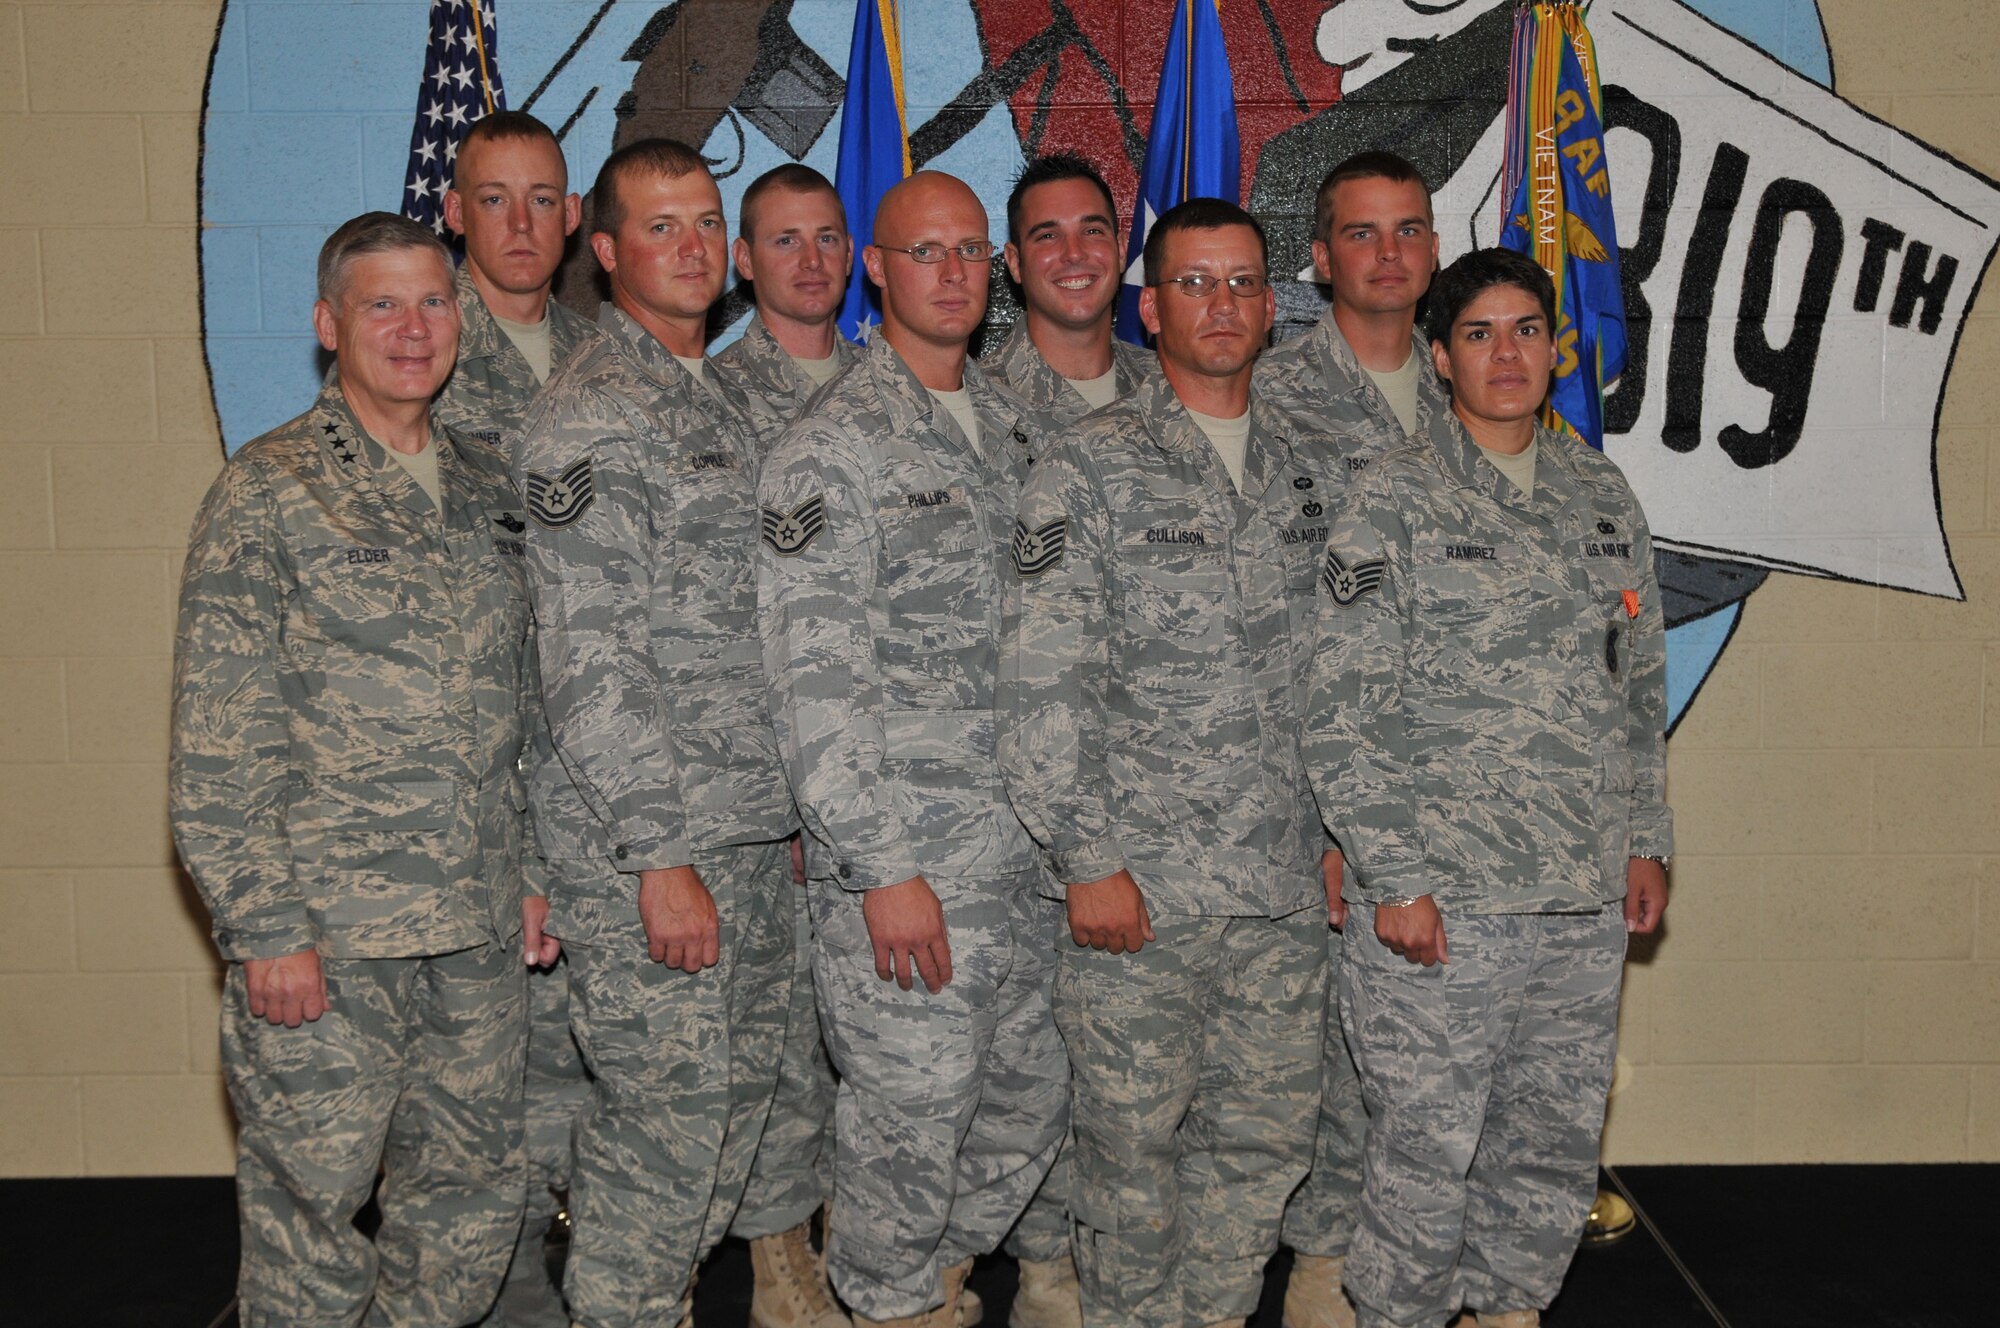 Lt. Gen. Robert Elder, Eighth Air Force (Air Forces Strategic) commander, poses with eight of the 11 members of the 819th RED HORSE Squadron who were presented Air Force Combat Action Medals Aug. 14 for their service while recently deployed to Iraq and Afghanistan. With the general are (left to right, front row to back row) Tech. Sgt. Bret Copple, Staff Sgt. Matthew Phillips, Tech. Sgt. Robert Cullison, Staff Sgt. Stephanie Rameriz, Staff Sgt. John Sinner, Staff Sgt. Douglas Ergish, Senior Airman Christopher D'Angelo and Staff Sgt. Casey Anderson. Not pictured are Tech. Sgt. Joseph Adair and Staff Sgts. Jason Bischoff and Douglas Ragone. (U.S. Air Force photo/John Turner)